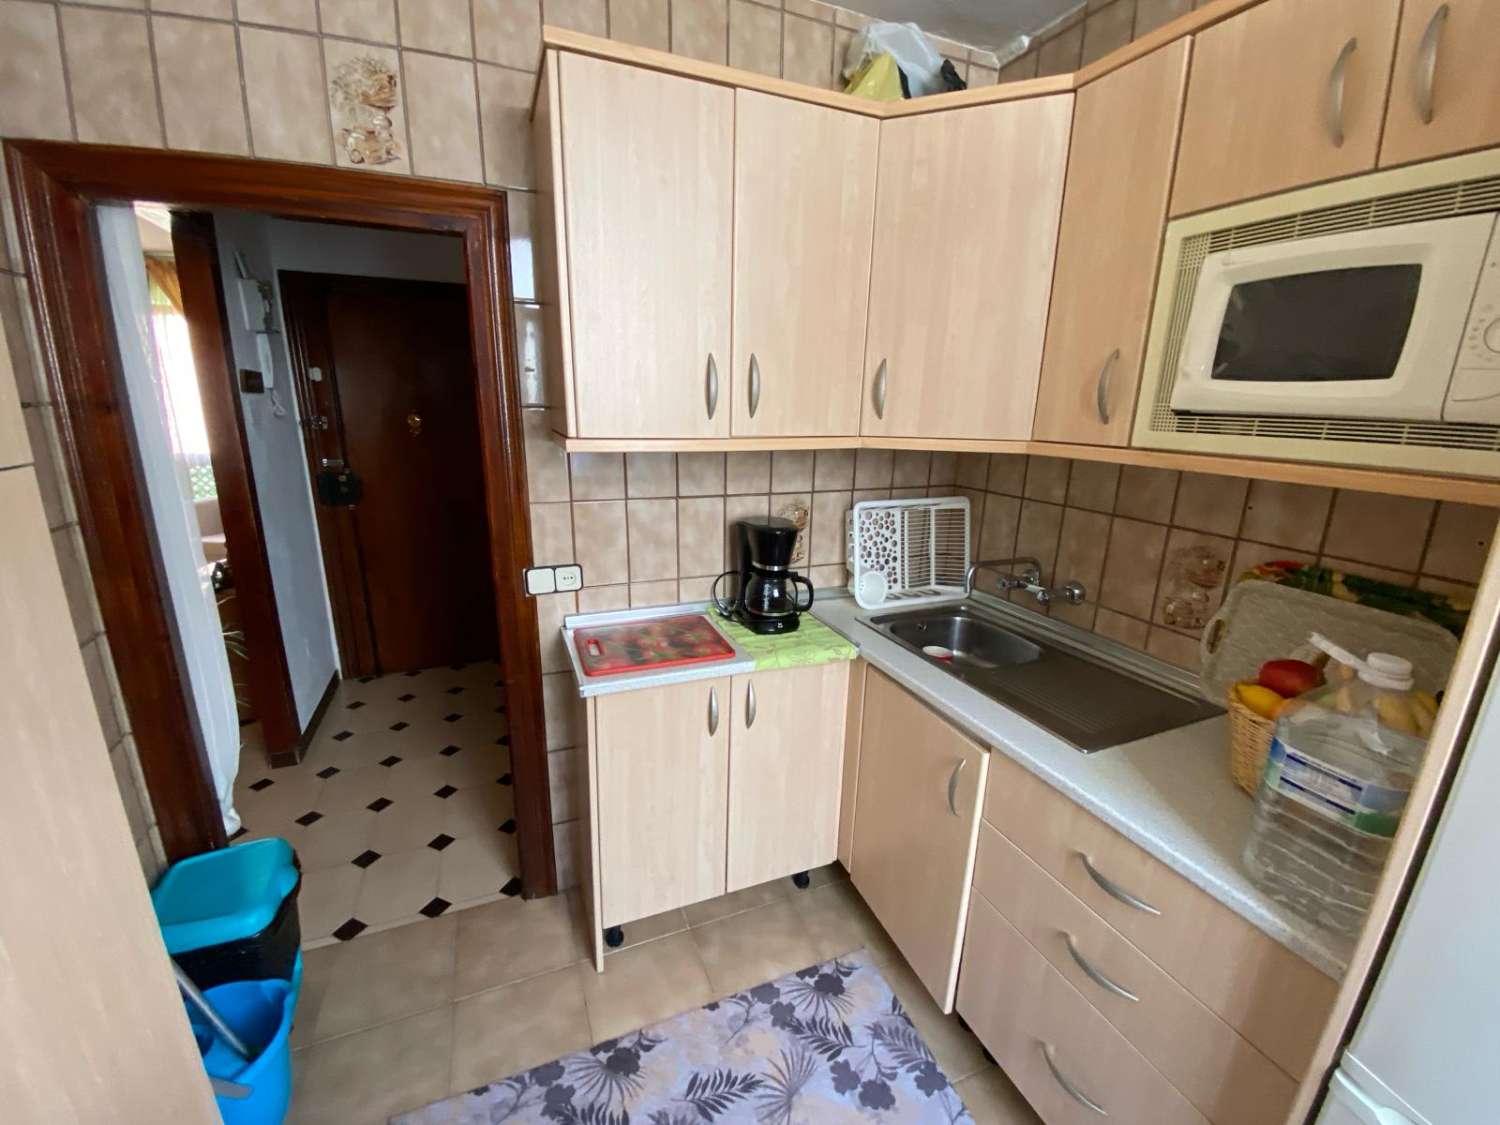 3 bedroom apartment for sale in good conditions